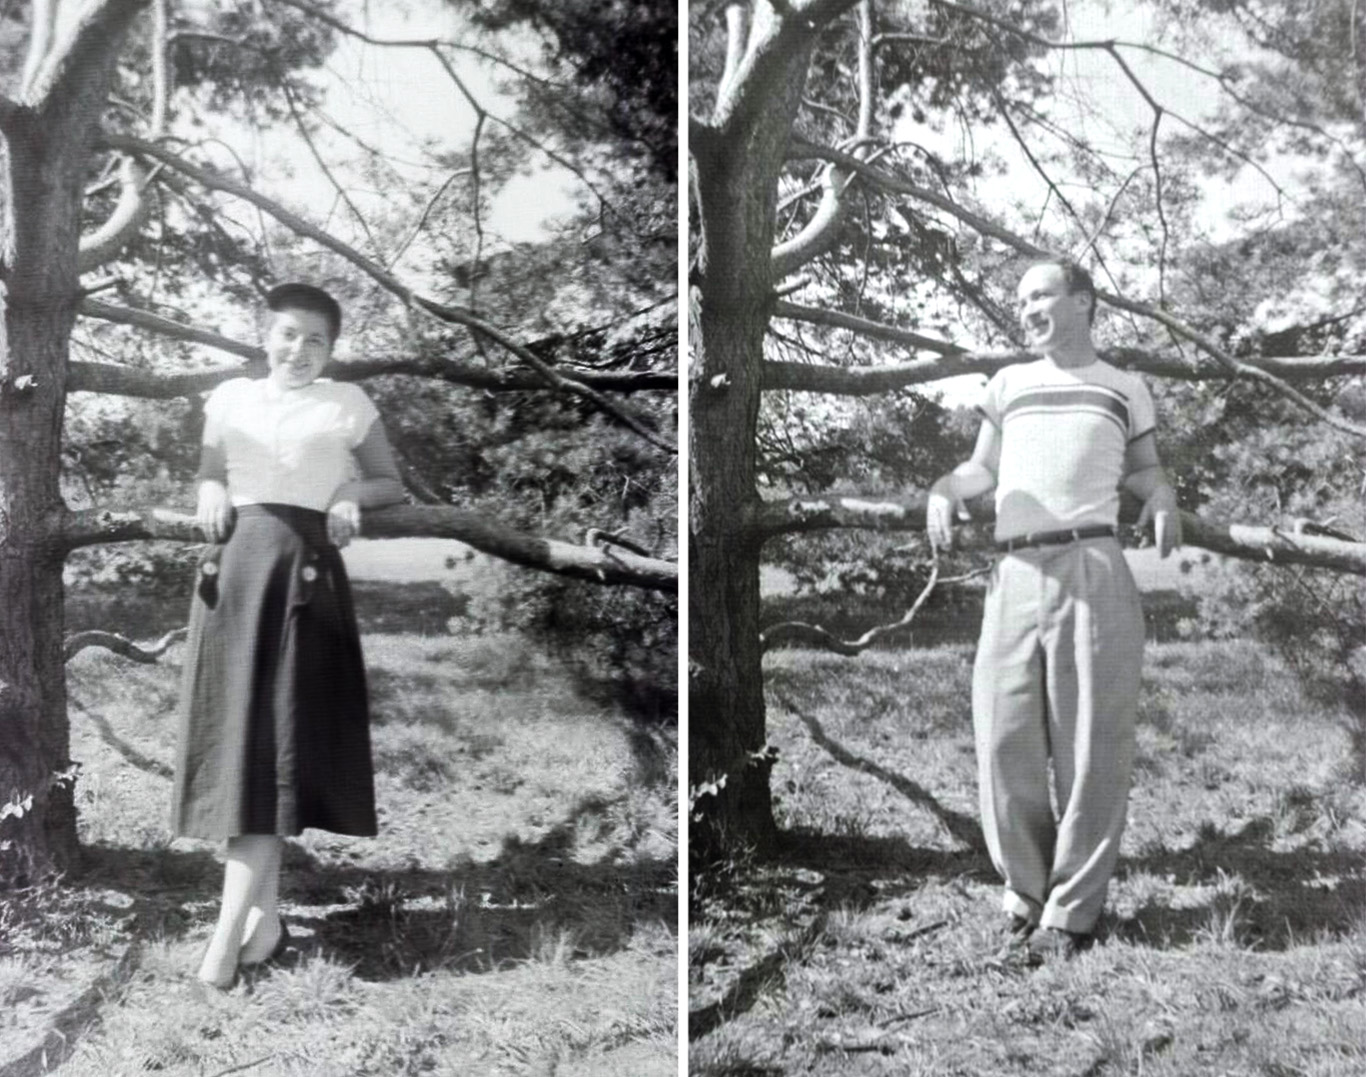 Either when they were dating or when they were first married, but long before there was a me, my parents took each other’s pictures, posed with a dramatic tree. View full size.